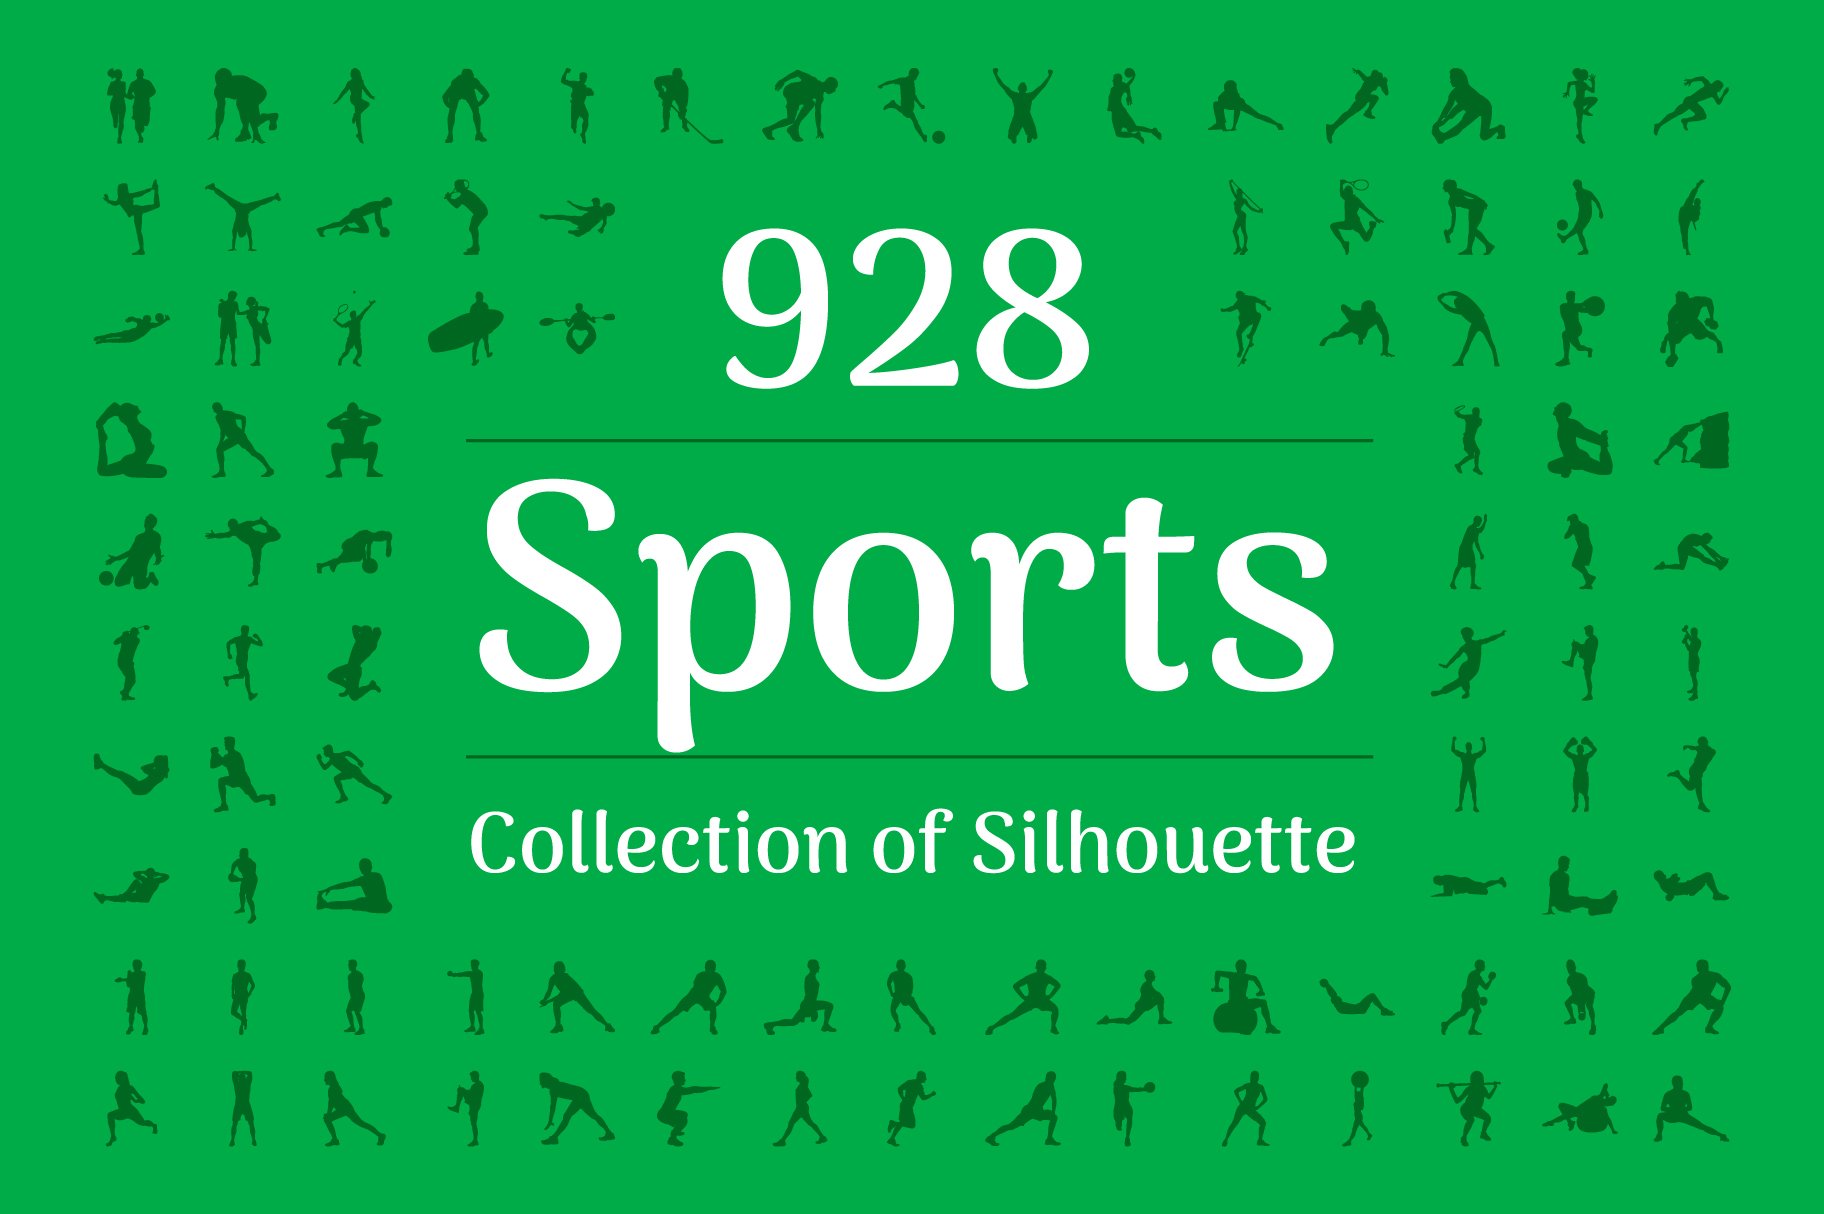 928 Sports Silhouette Vectors cover image.